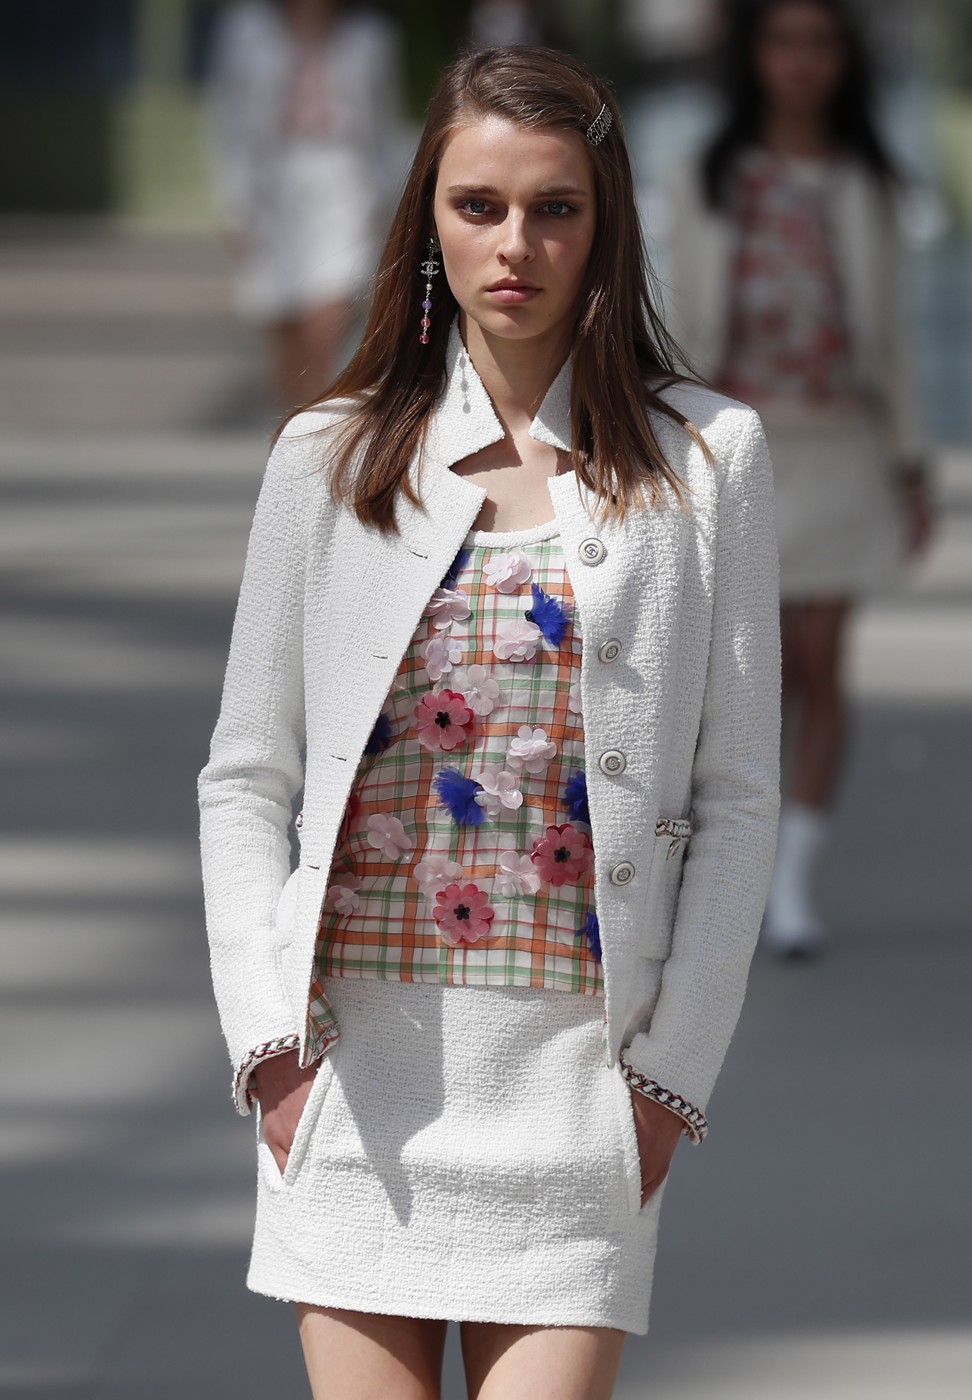 Chanel’s Virginie Viard, Karl Lagerfeld’s successor, harks back to the ...